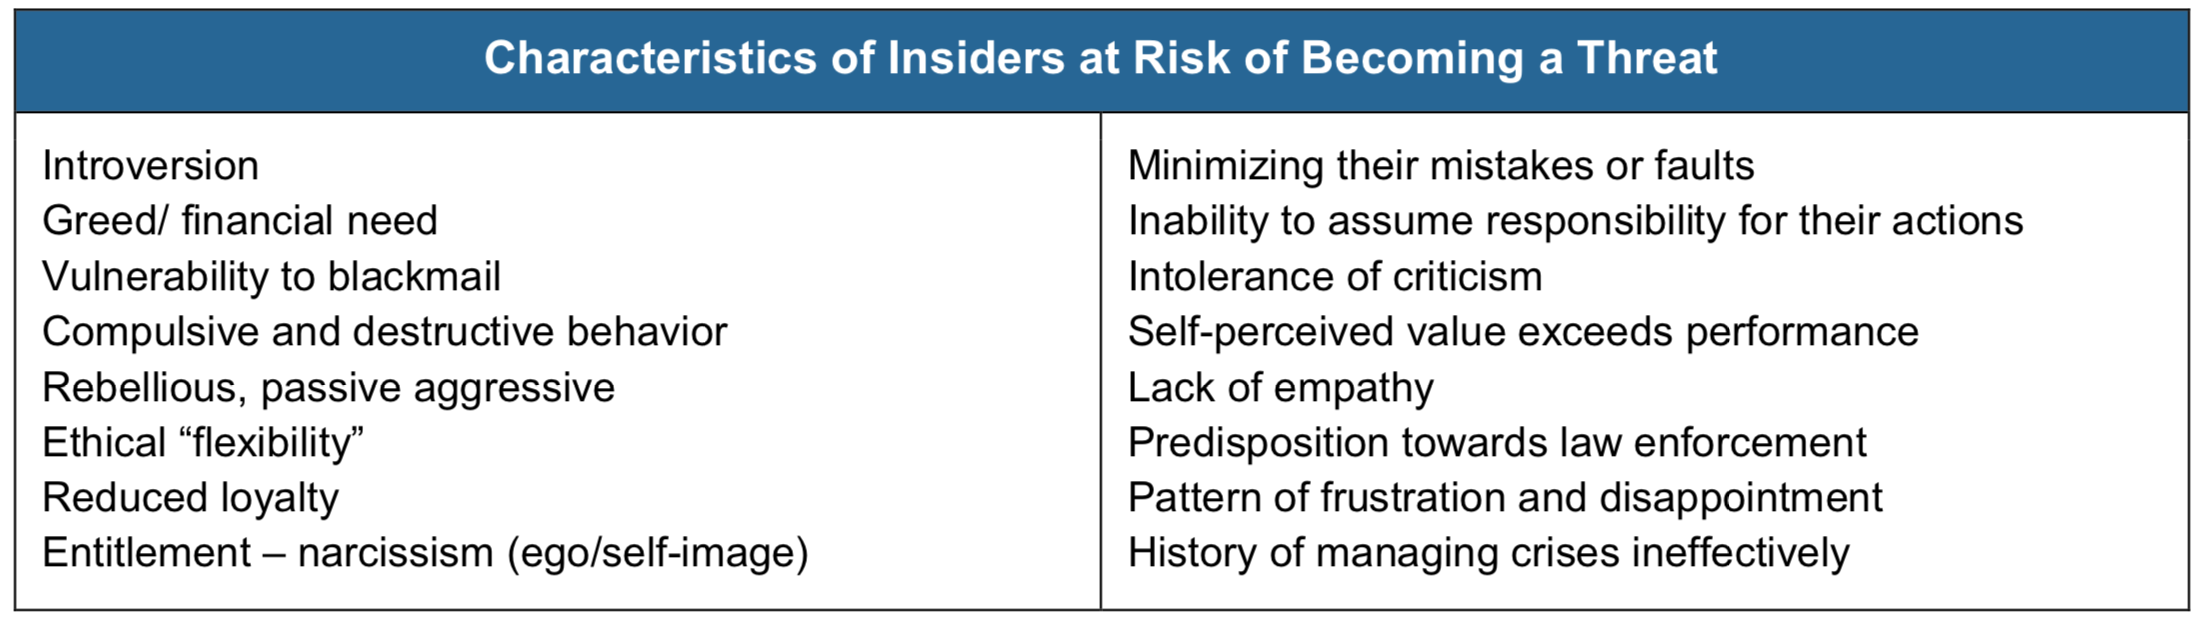 Characteristics of Insiders at Risk of Becoming a Threat